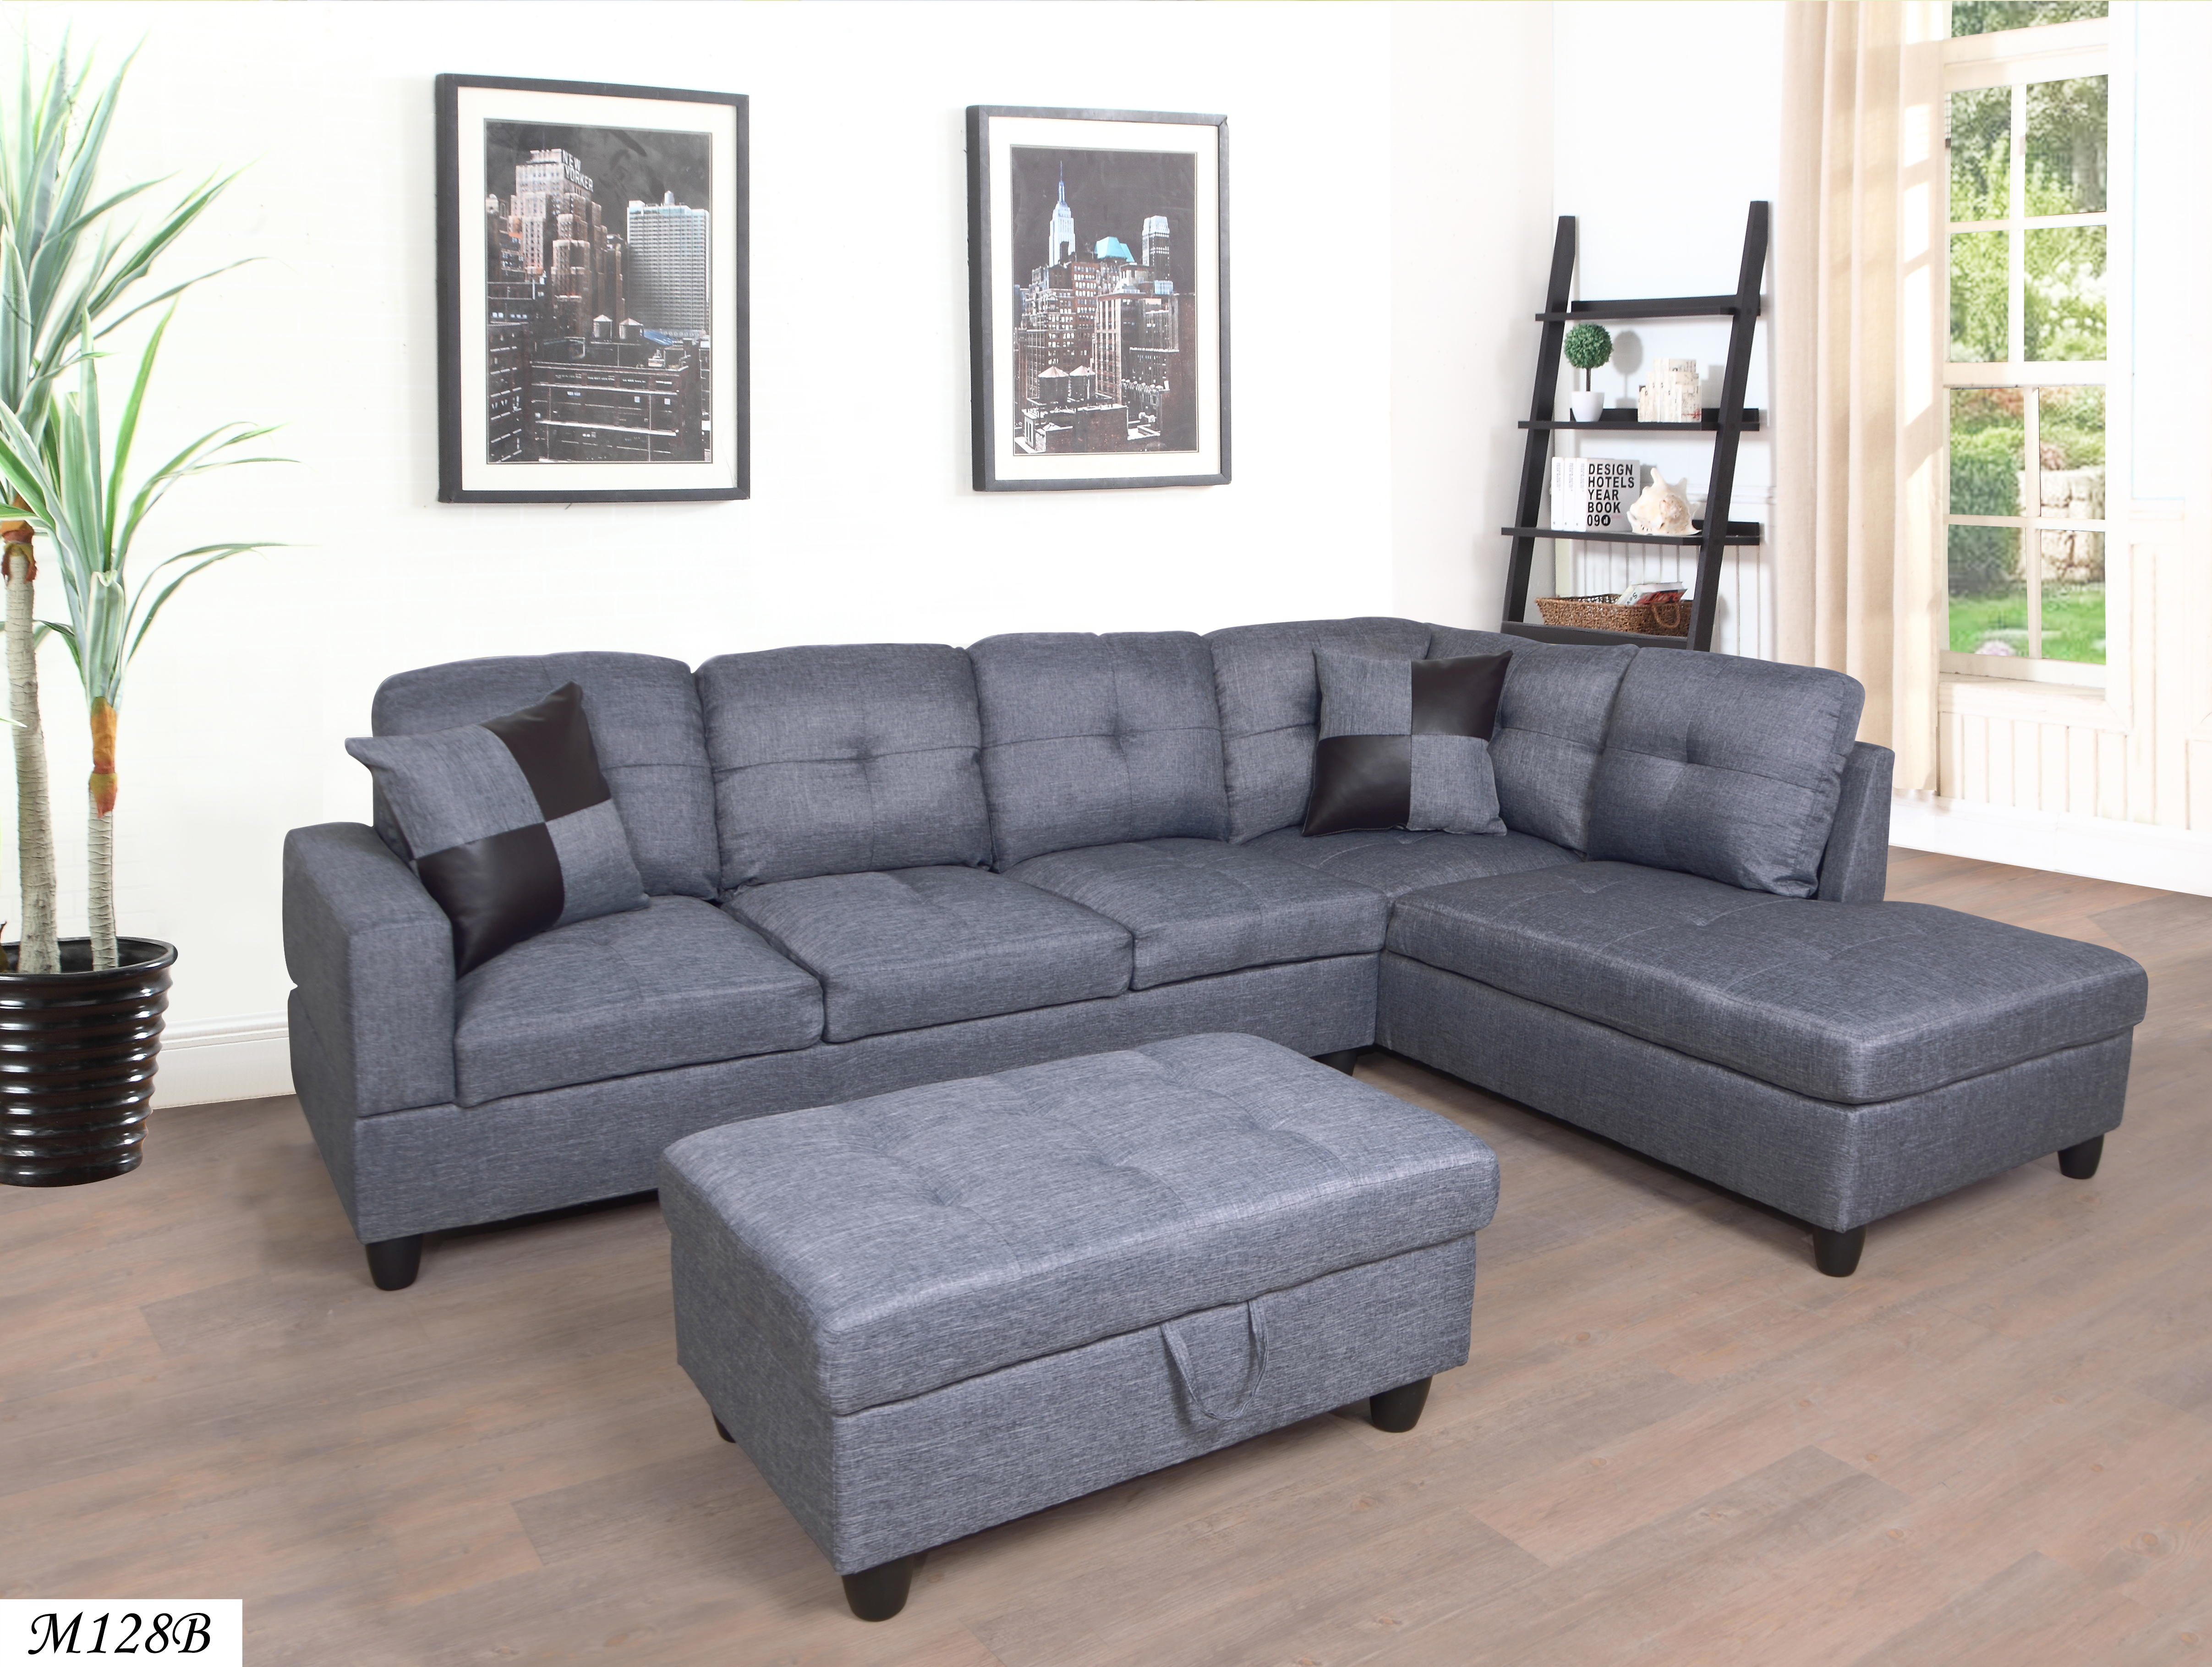 3 PC Sectional Sofa Set, (Gray) Linen Right -Facing Chaise with Free Storage Ottoman-Boyel Living